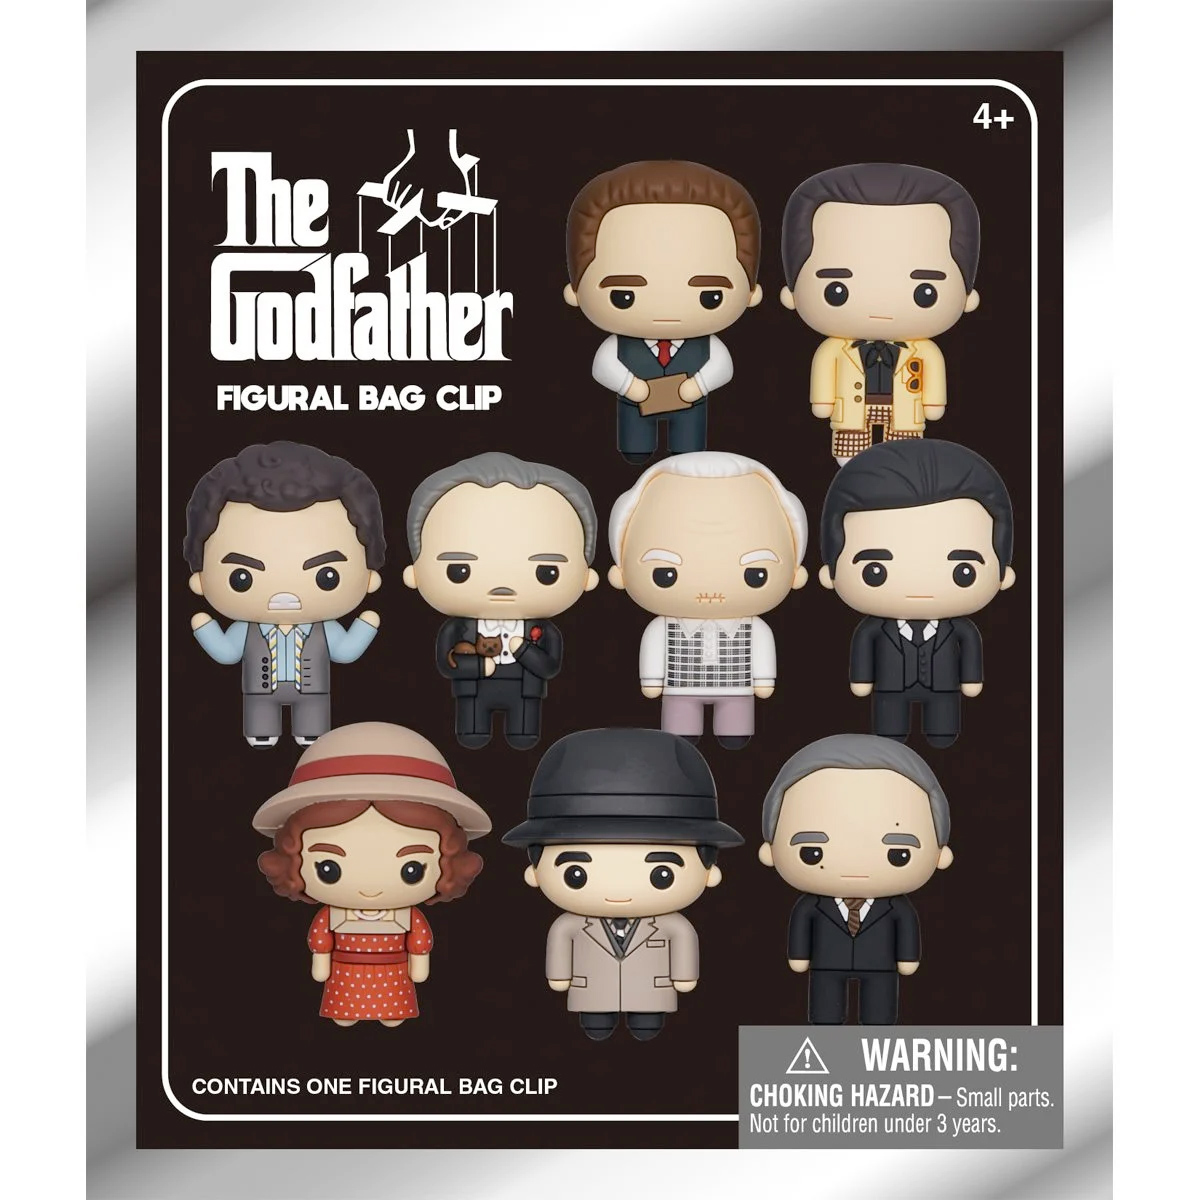 The Godfather 3D Figural Bag Clips Keychains